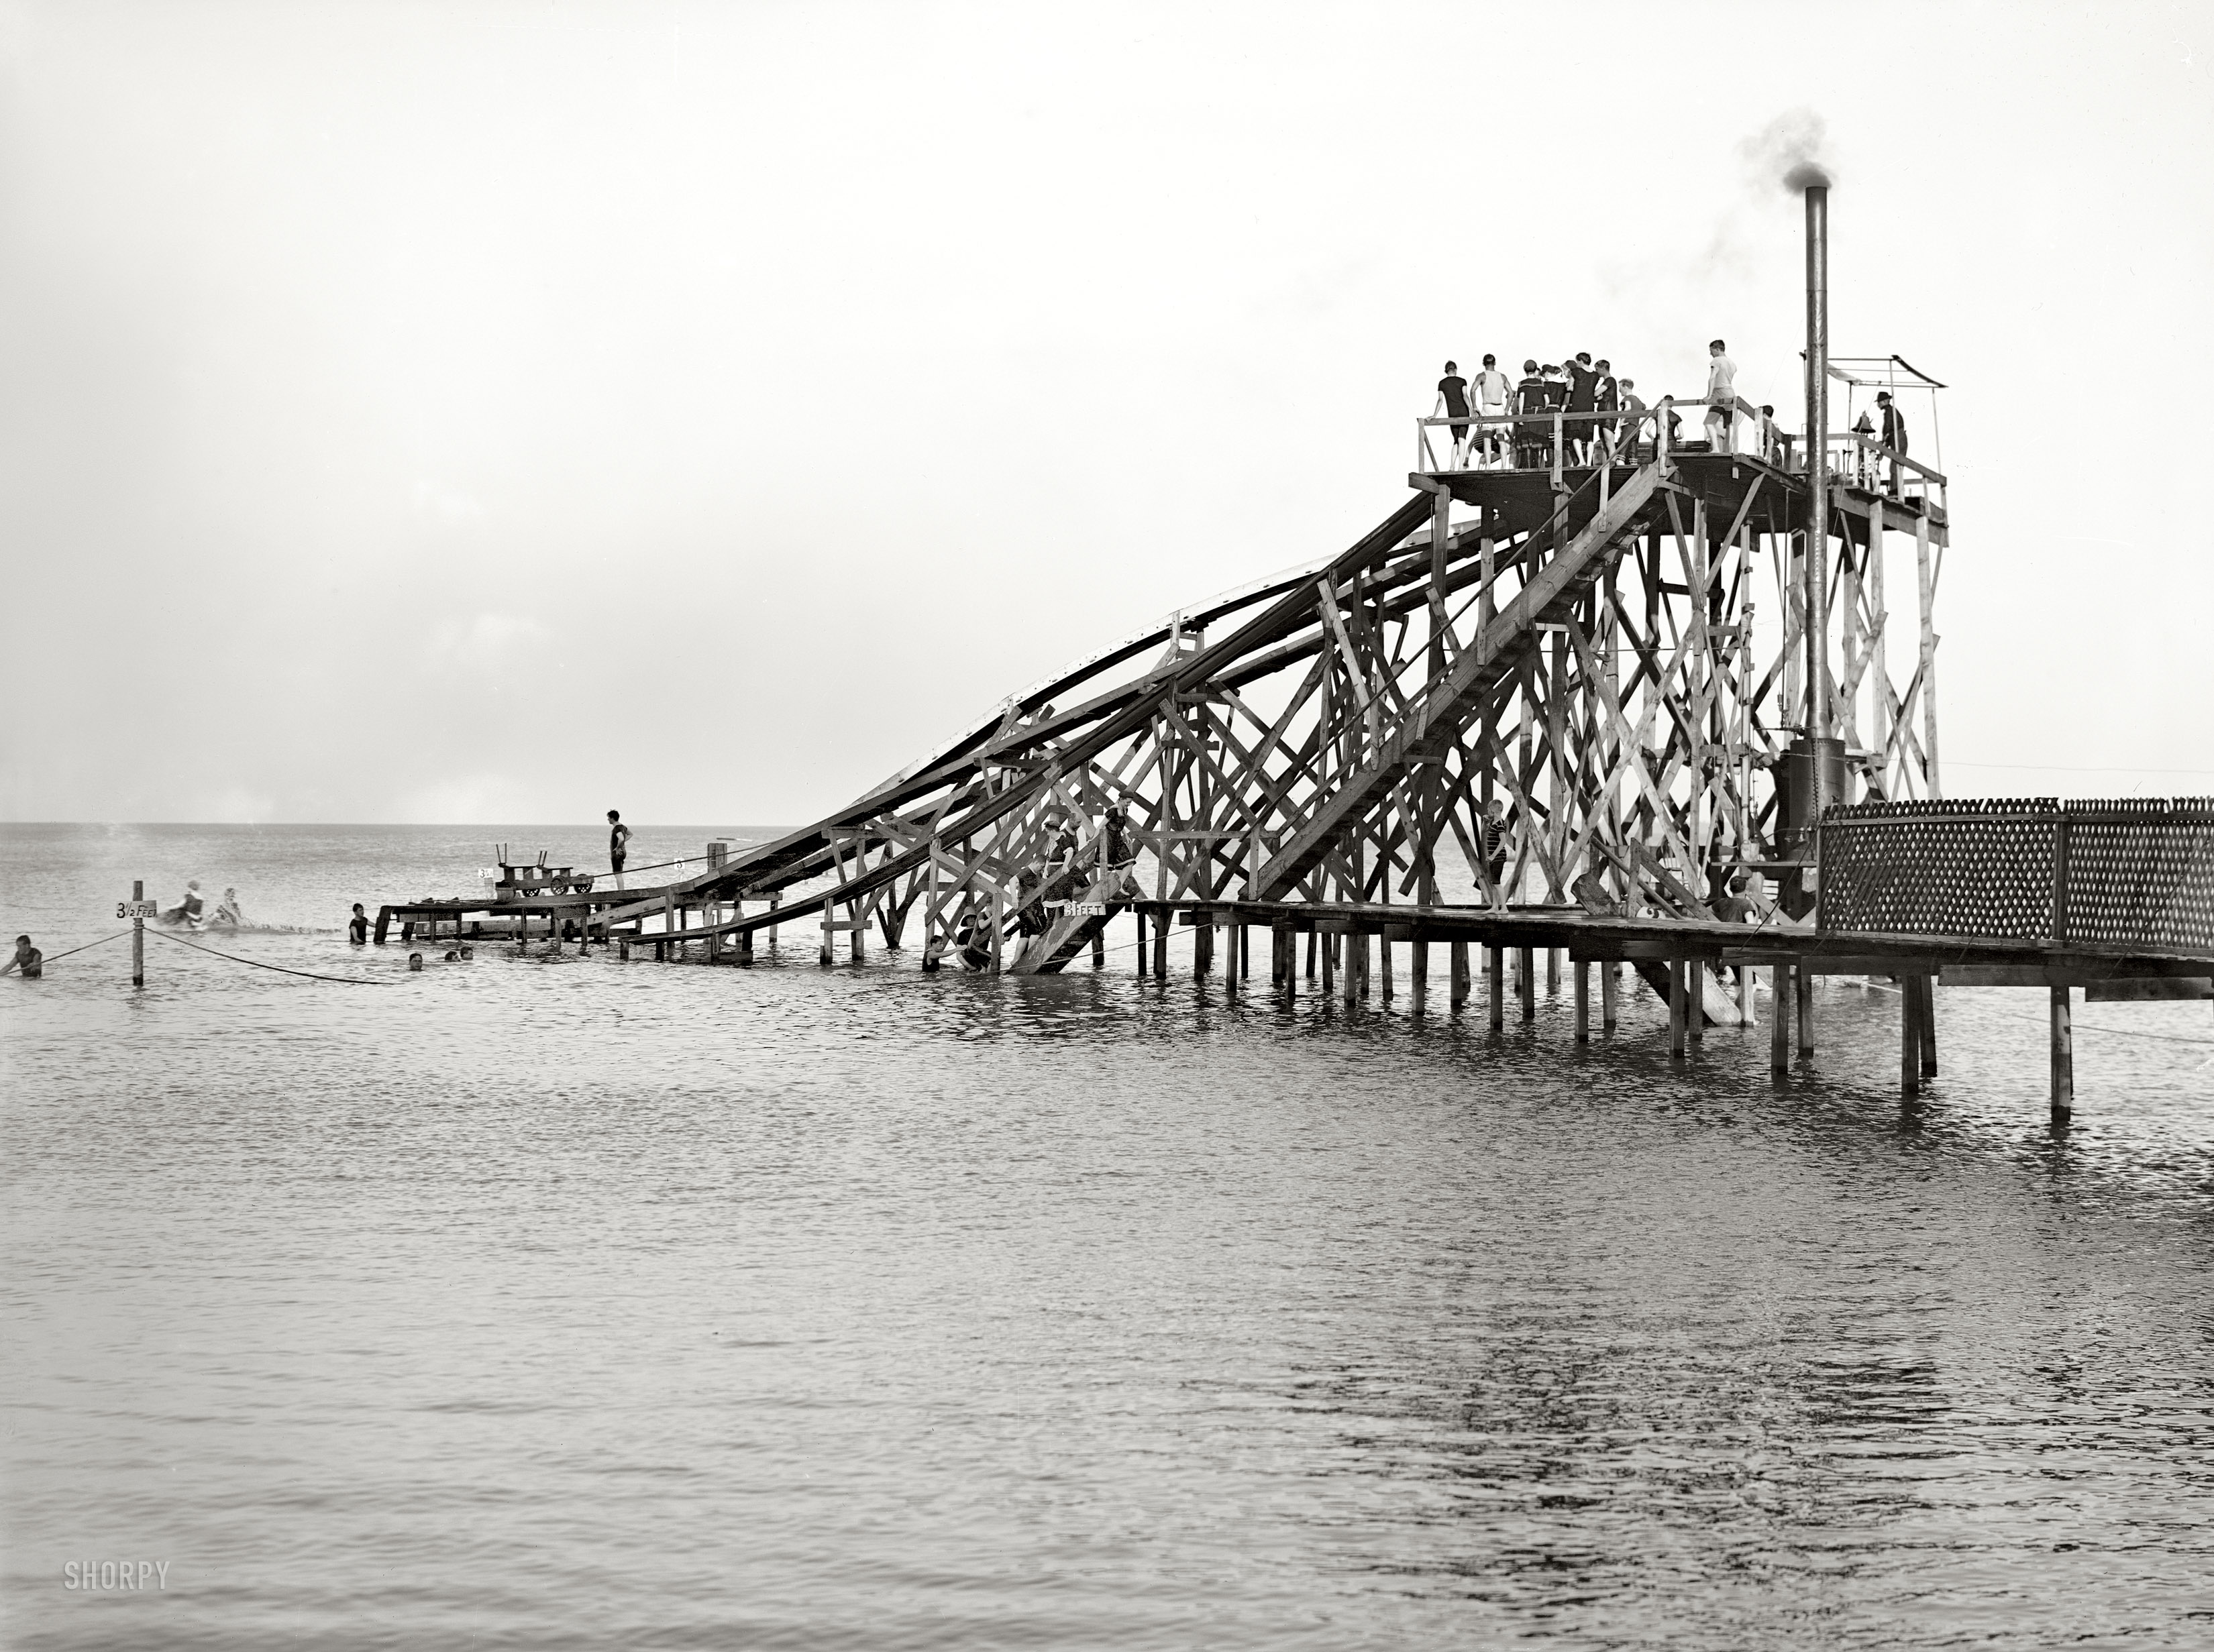 Off South Bass Island in Lake Erie circa 1904. "The Water Toboggan. Put-In Bay, Ohio." 8x10 inch dry plate glass negative, Detroit Publishing Co. View full size.